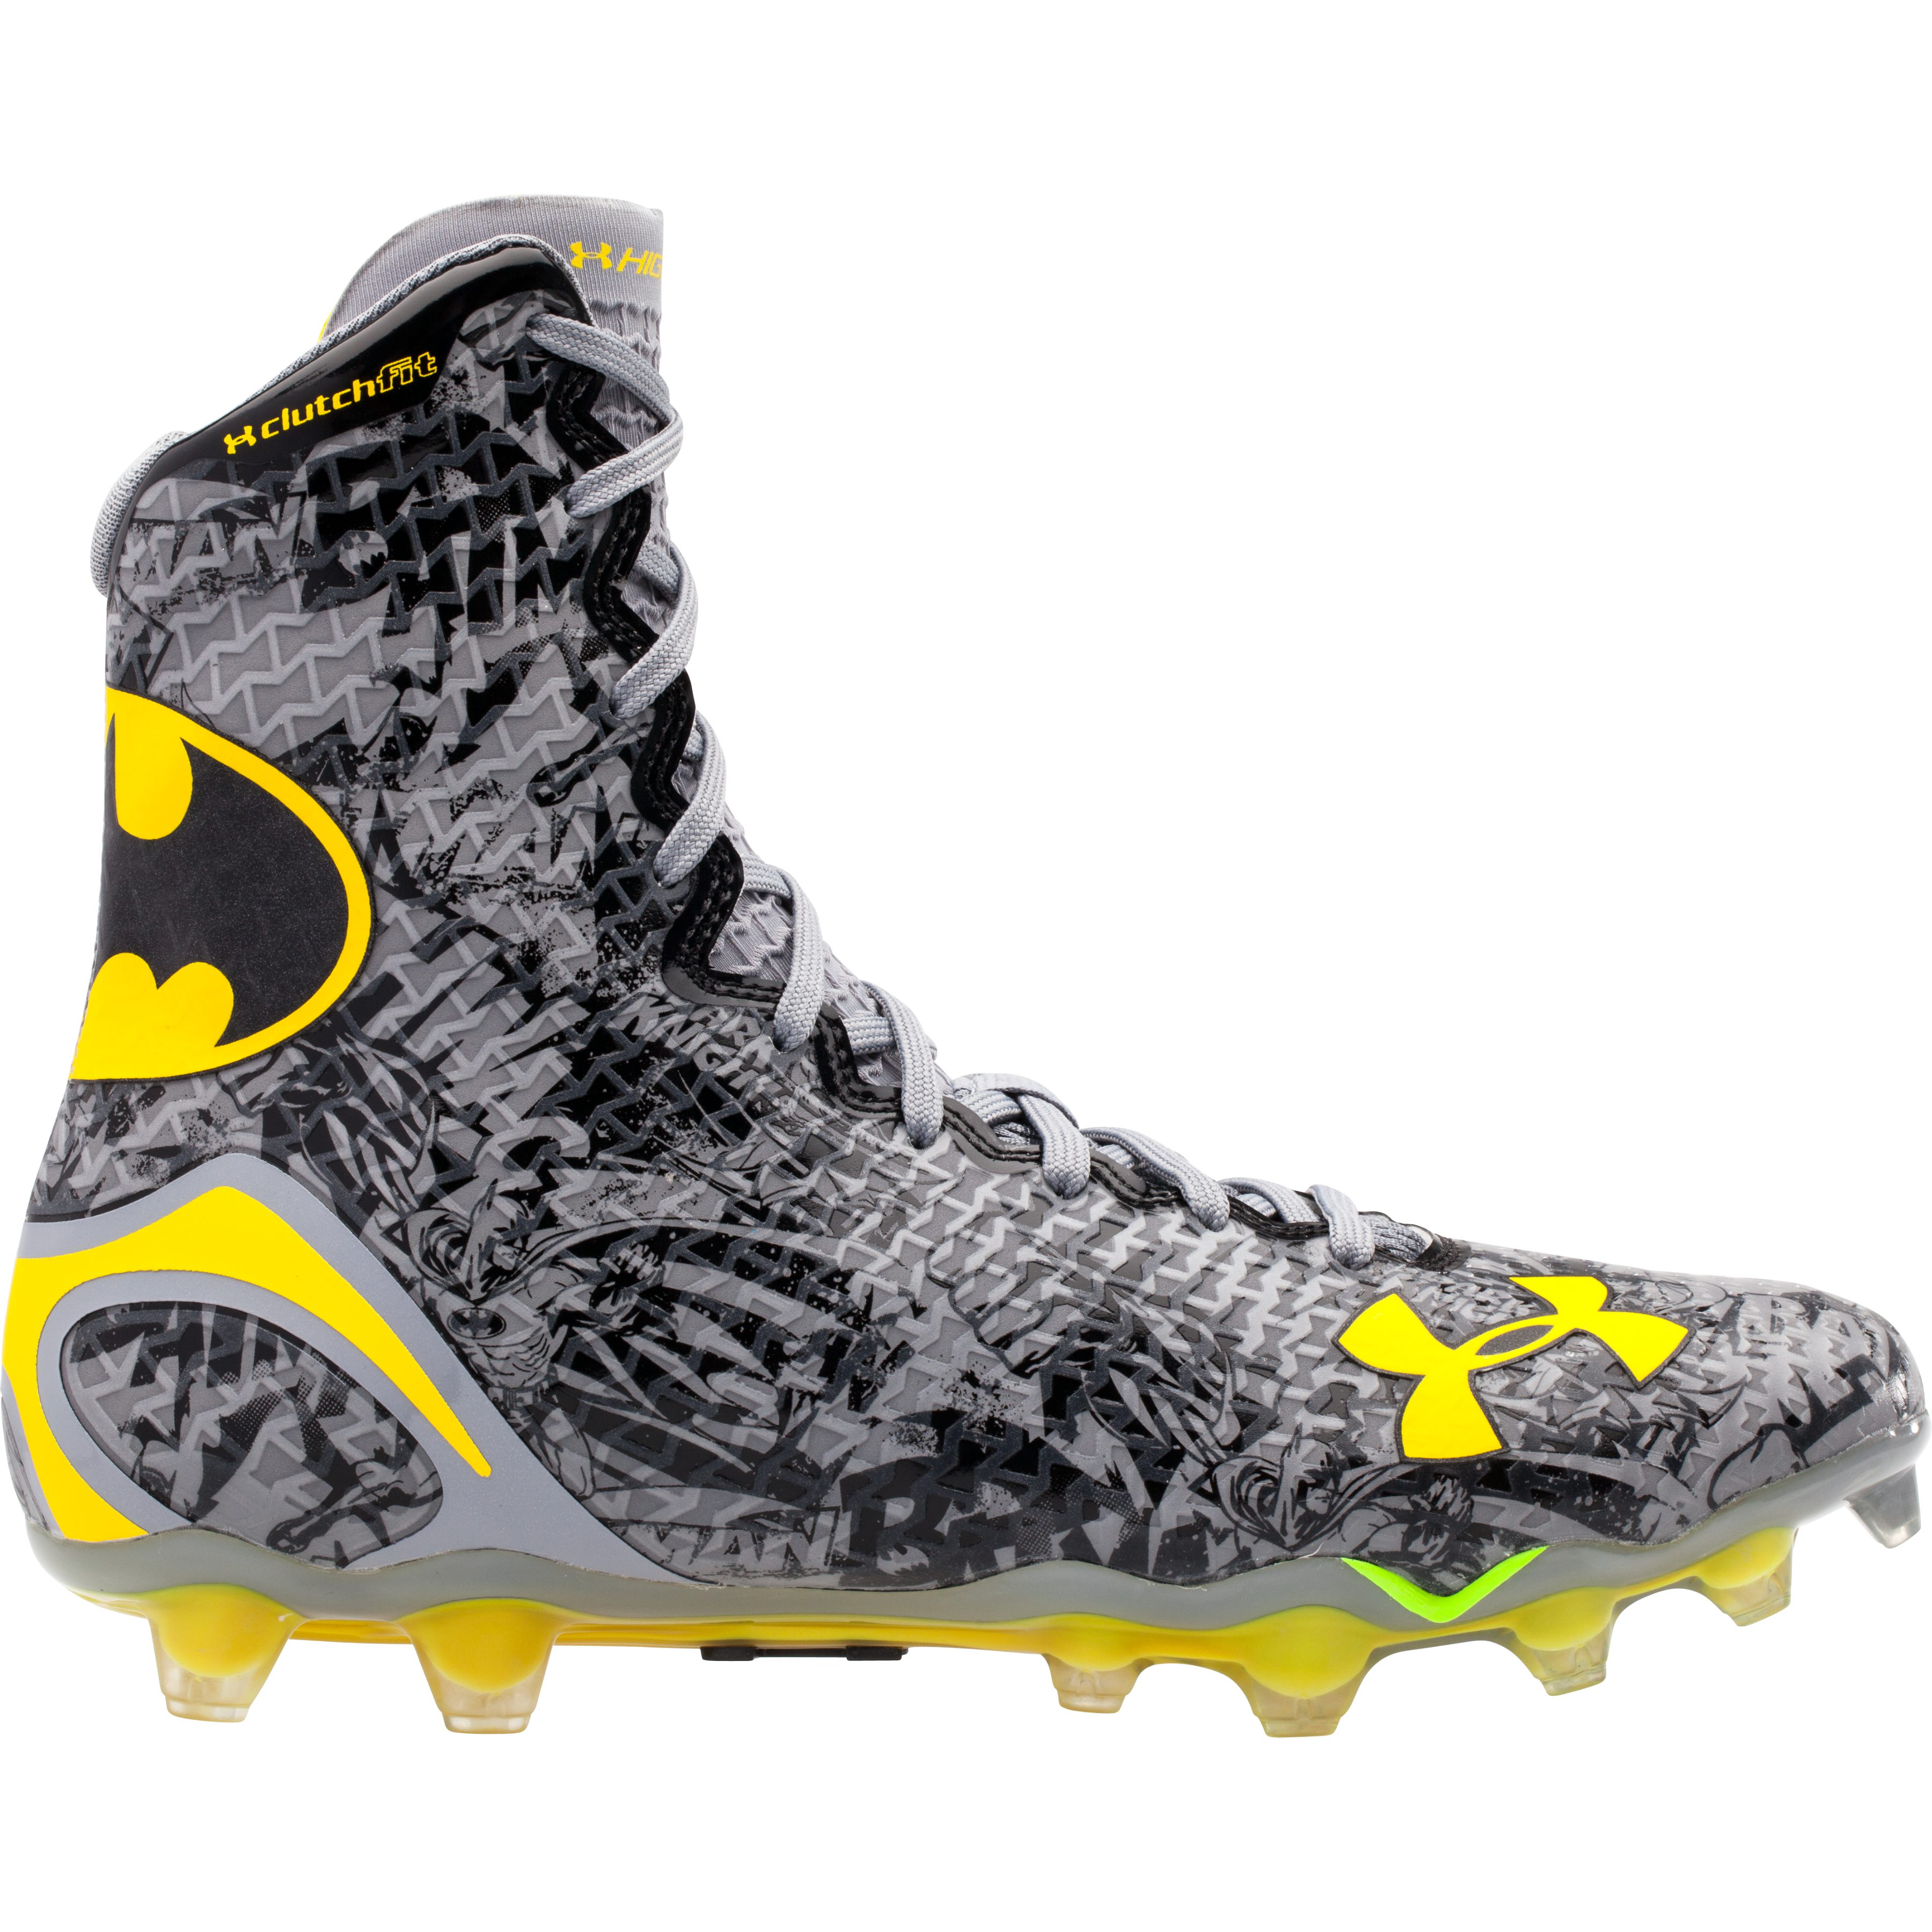 eastbay under armour cleats